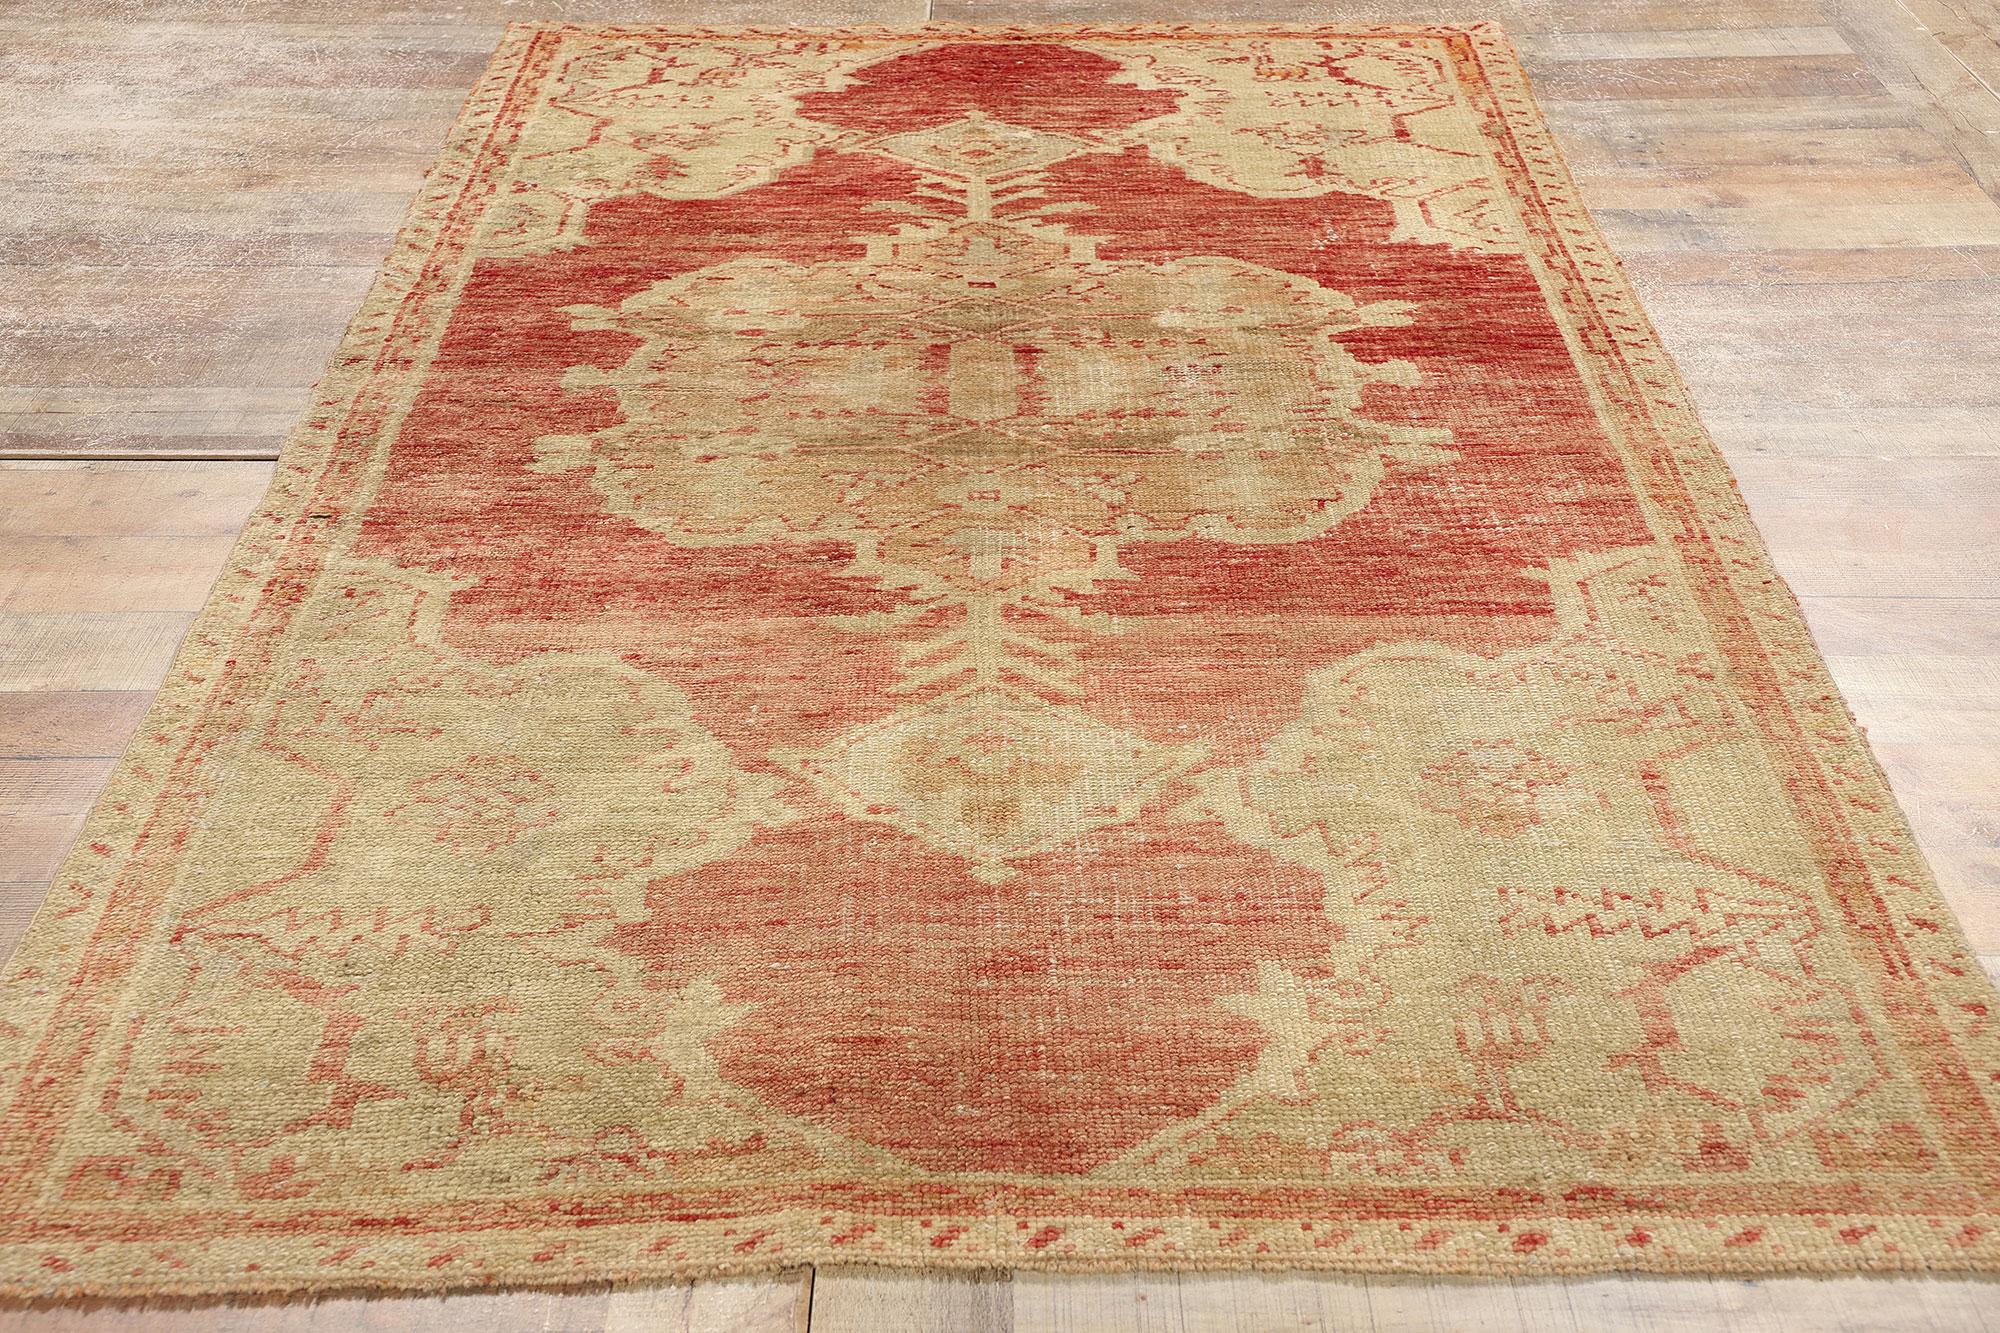 Vintage Turkish Oushak Rug with Rustic Earth-Tone Colors For Sale 2